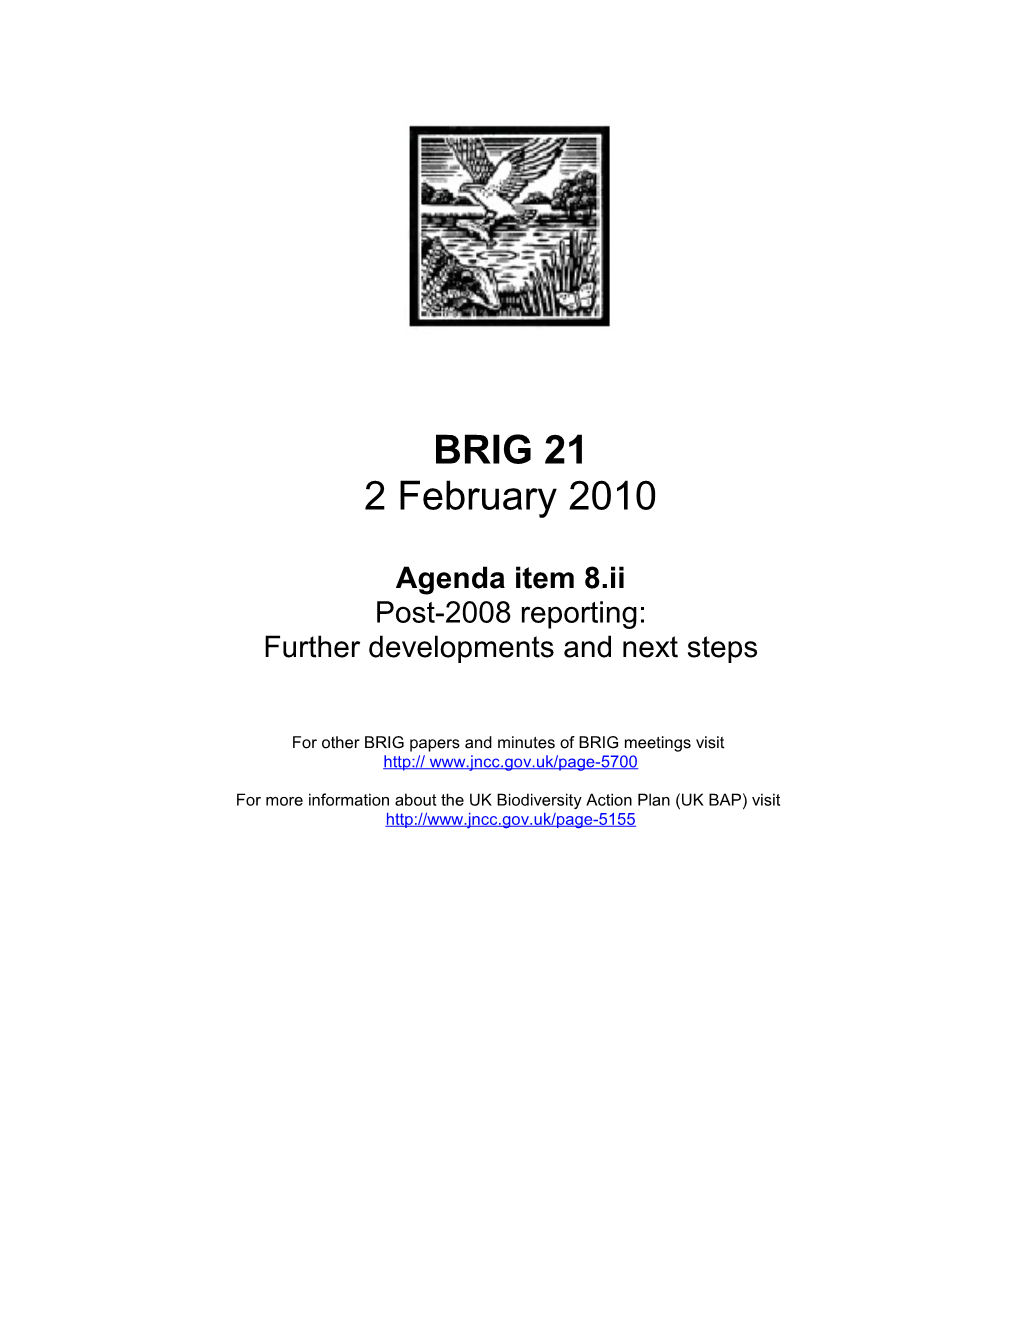 BRIG020210 Post 2008 Reporting Further Developments and Next Steps